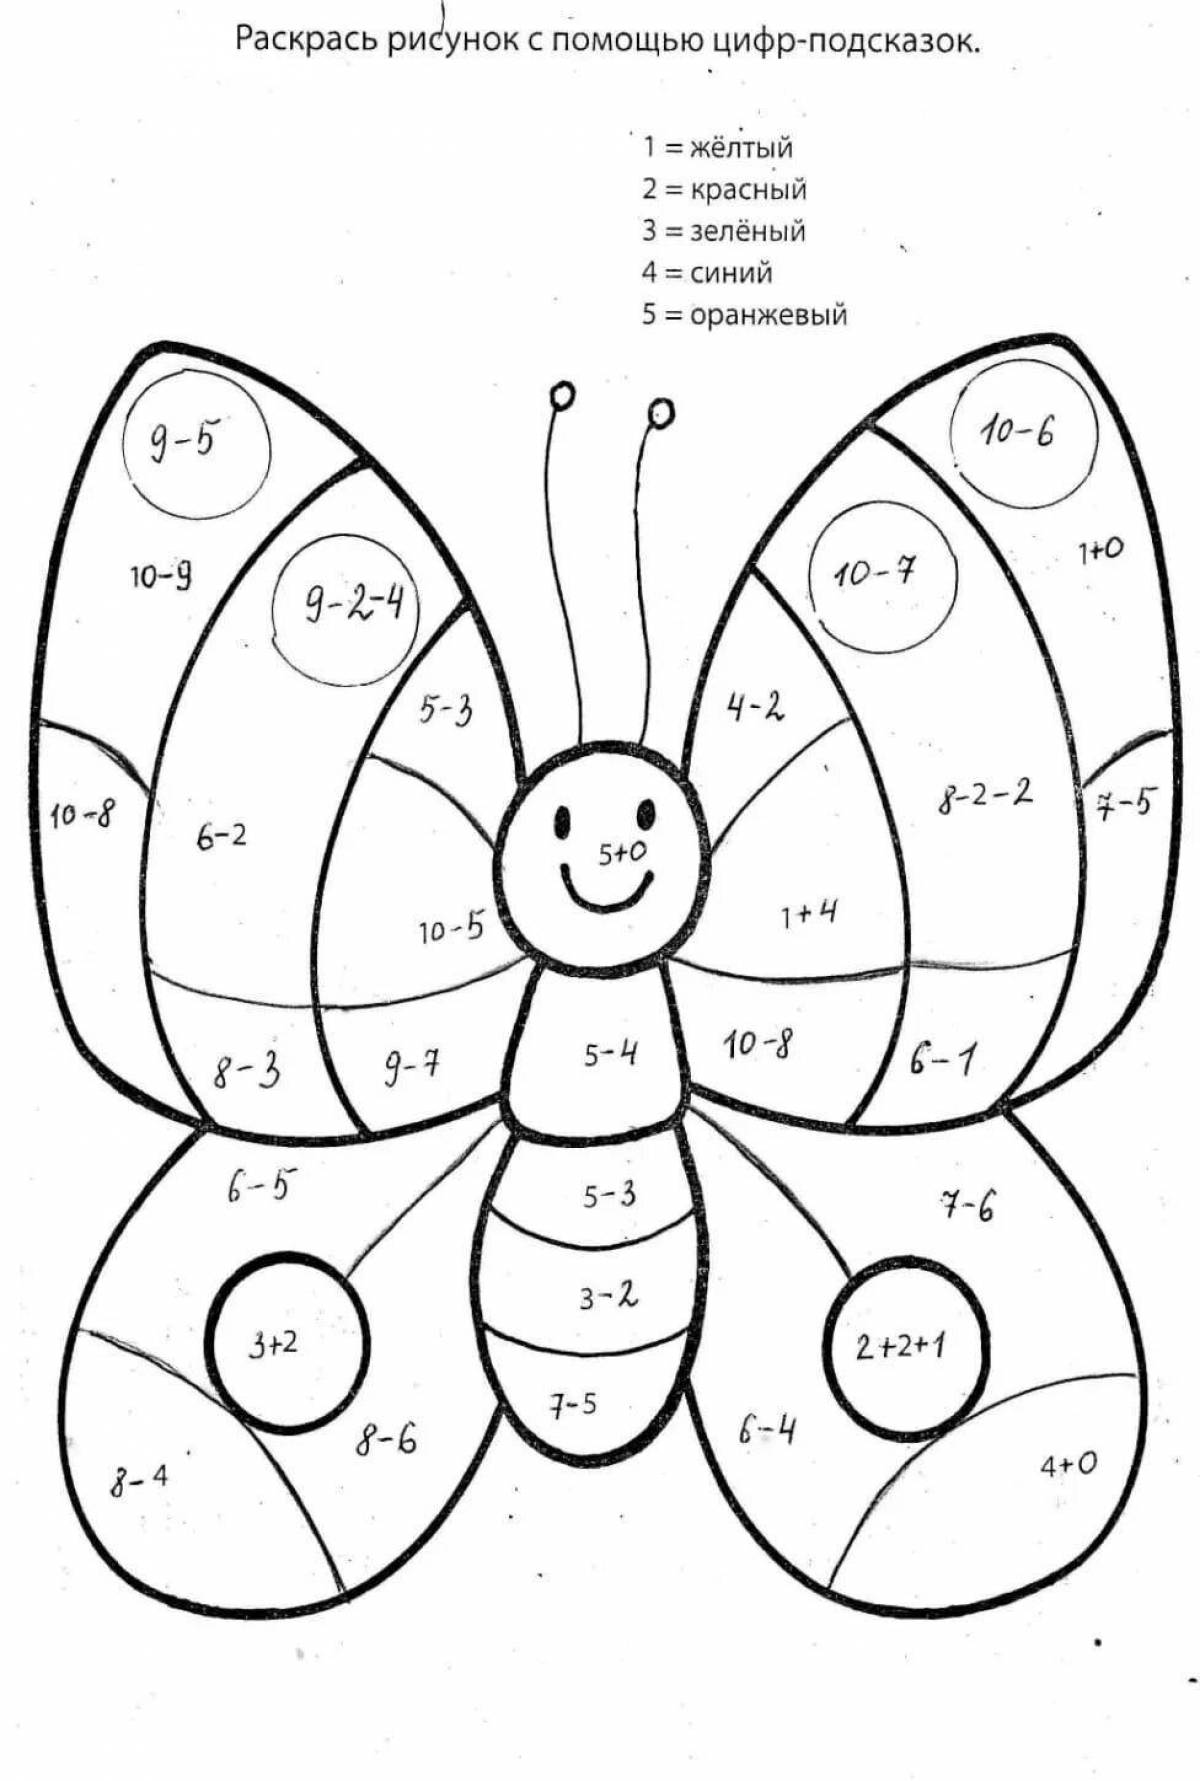 Adorable coloring pages with math examples for grade 1